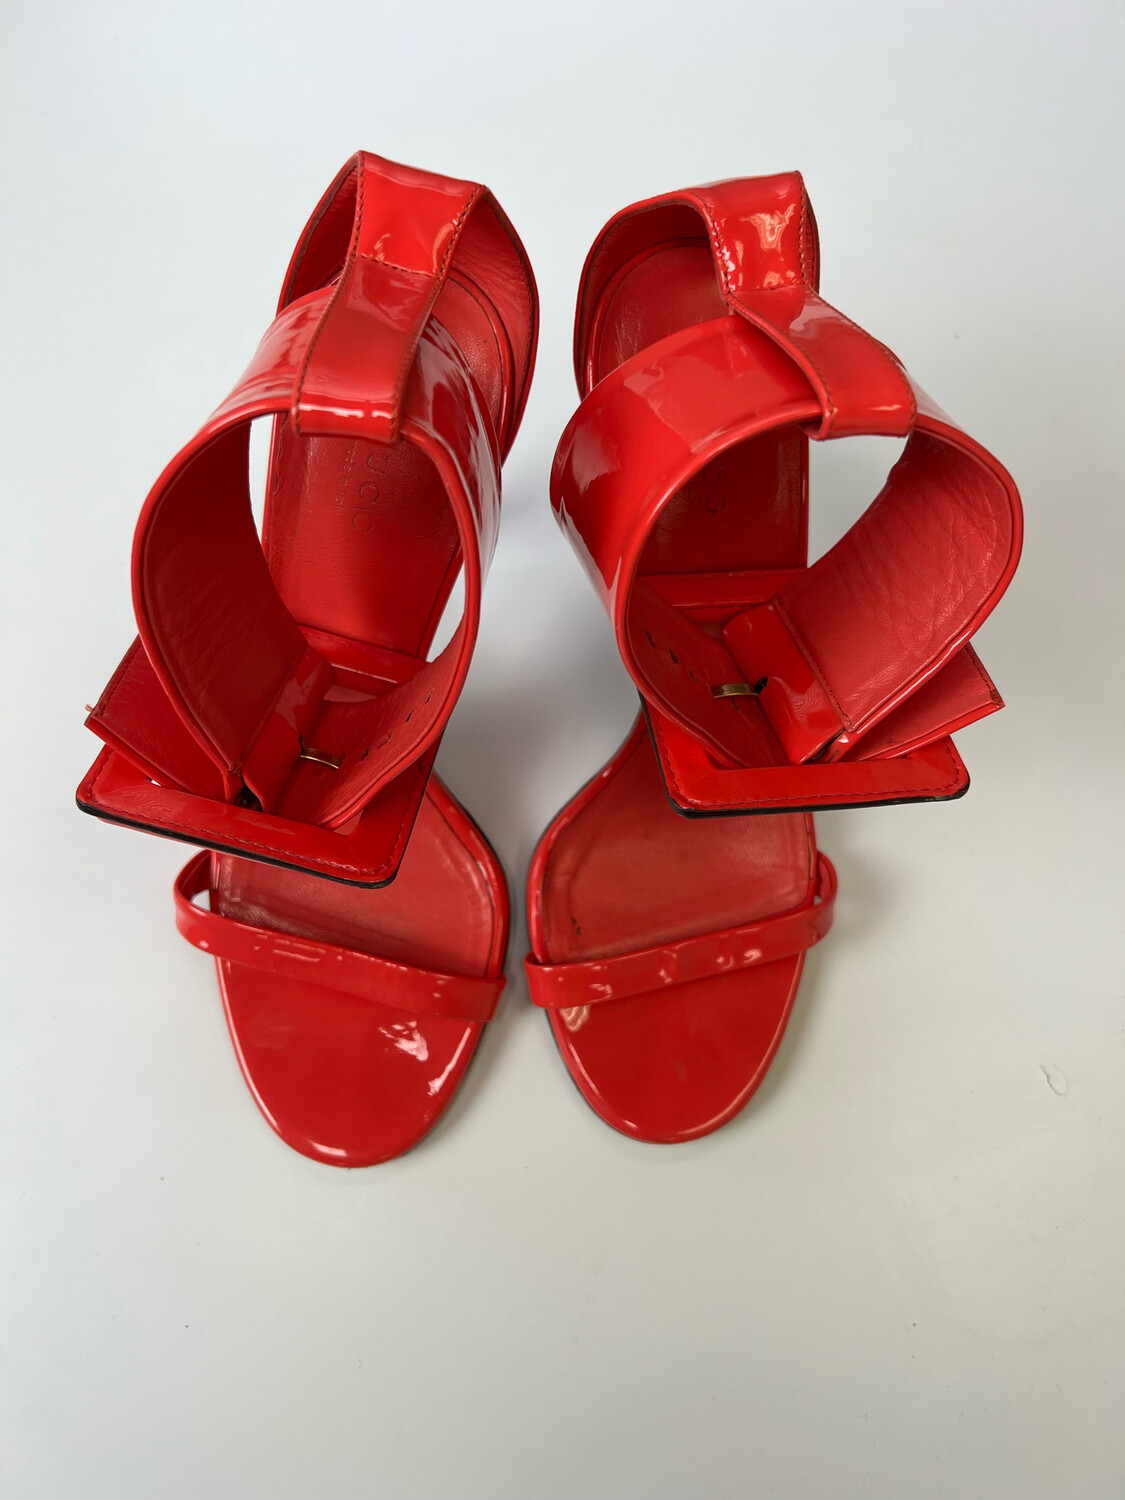 Gucci Shoes, Open Toe, Size 38 1/2, Preowned, WA001